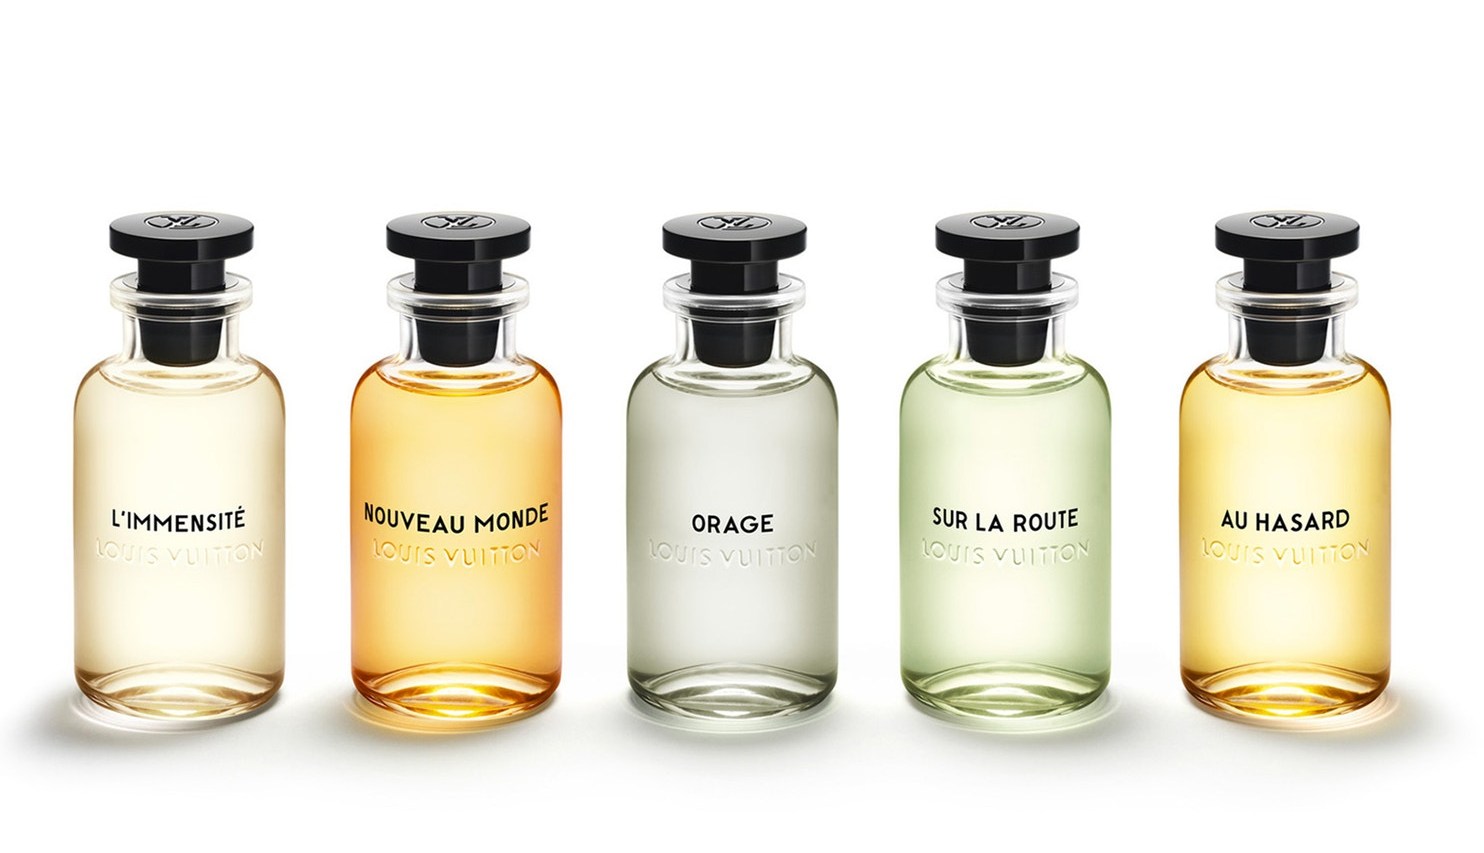 Louis Vuitton captures the scents of destinations far and wide in their new fragrance line for men